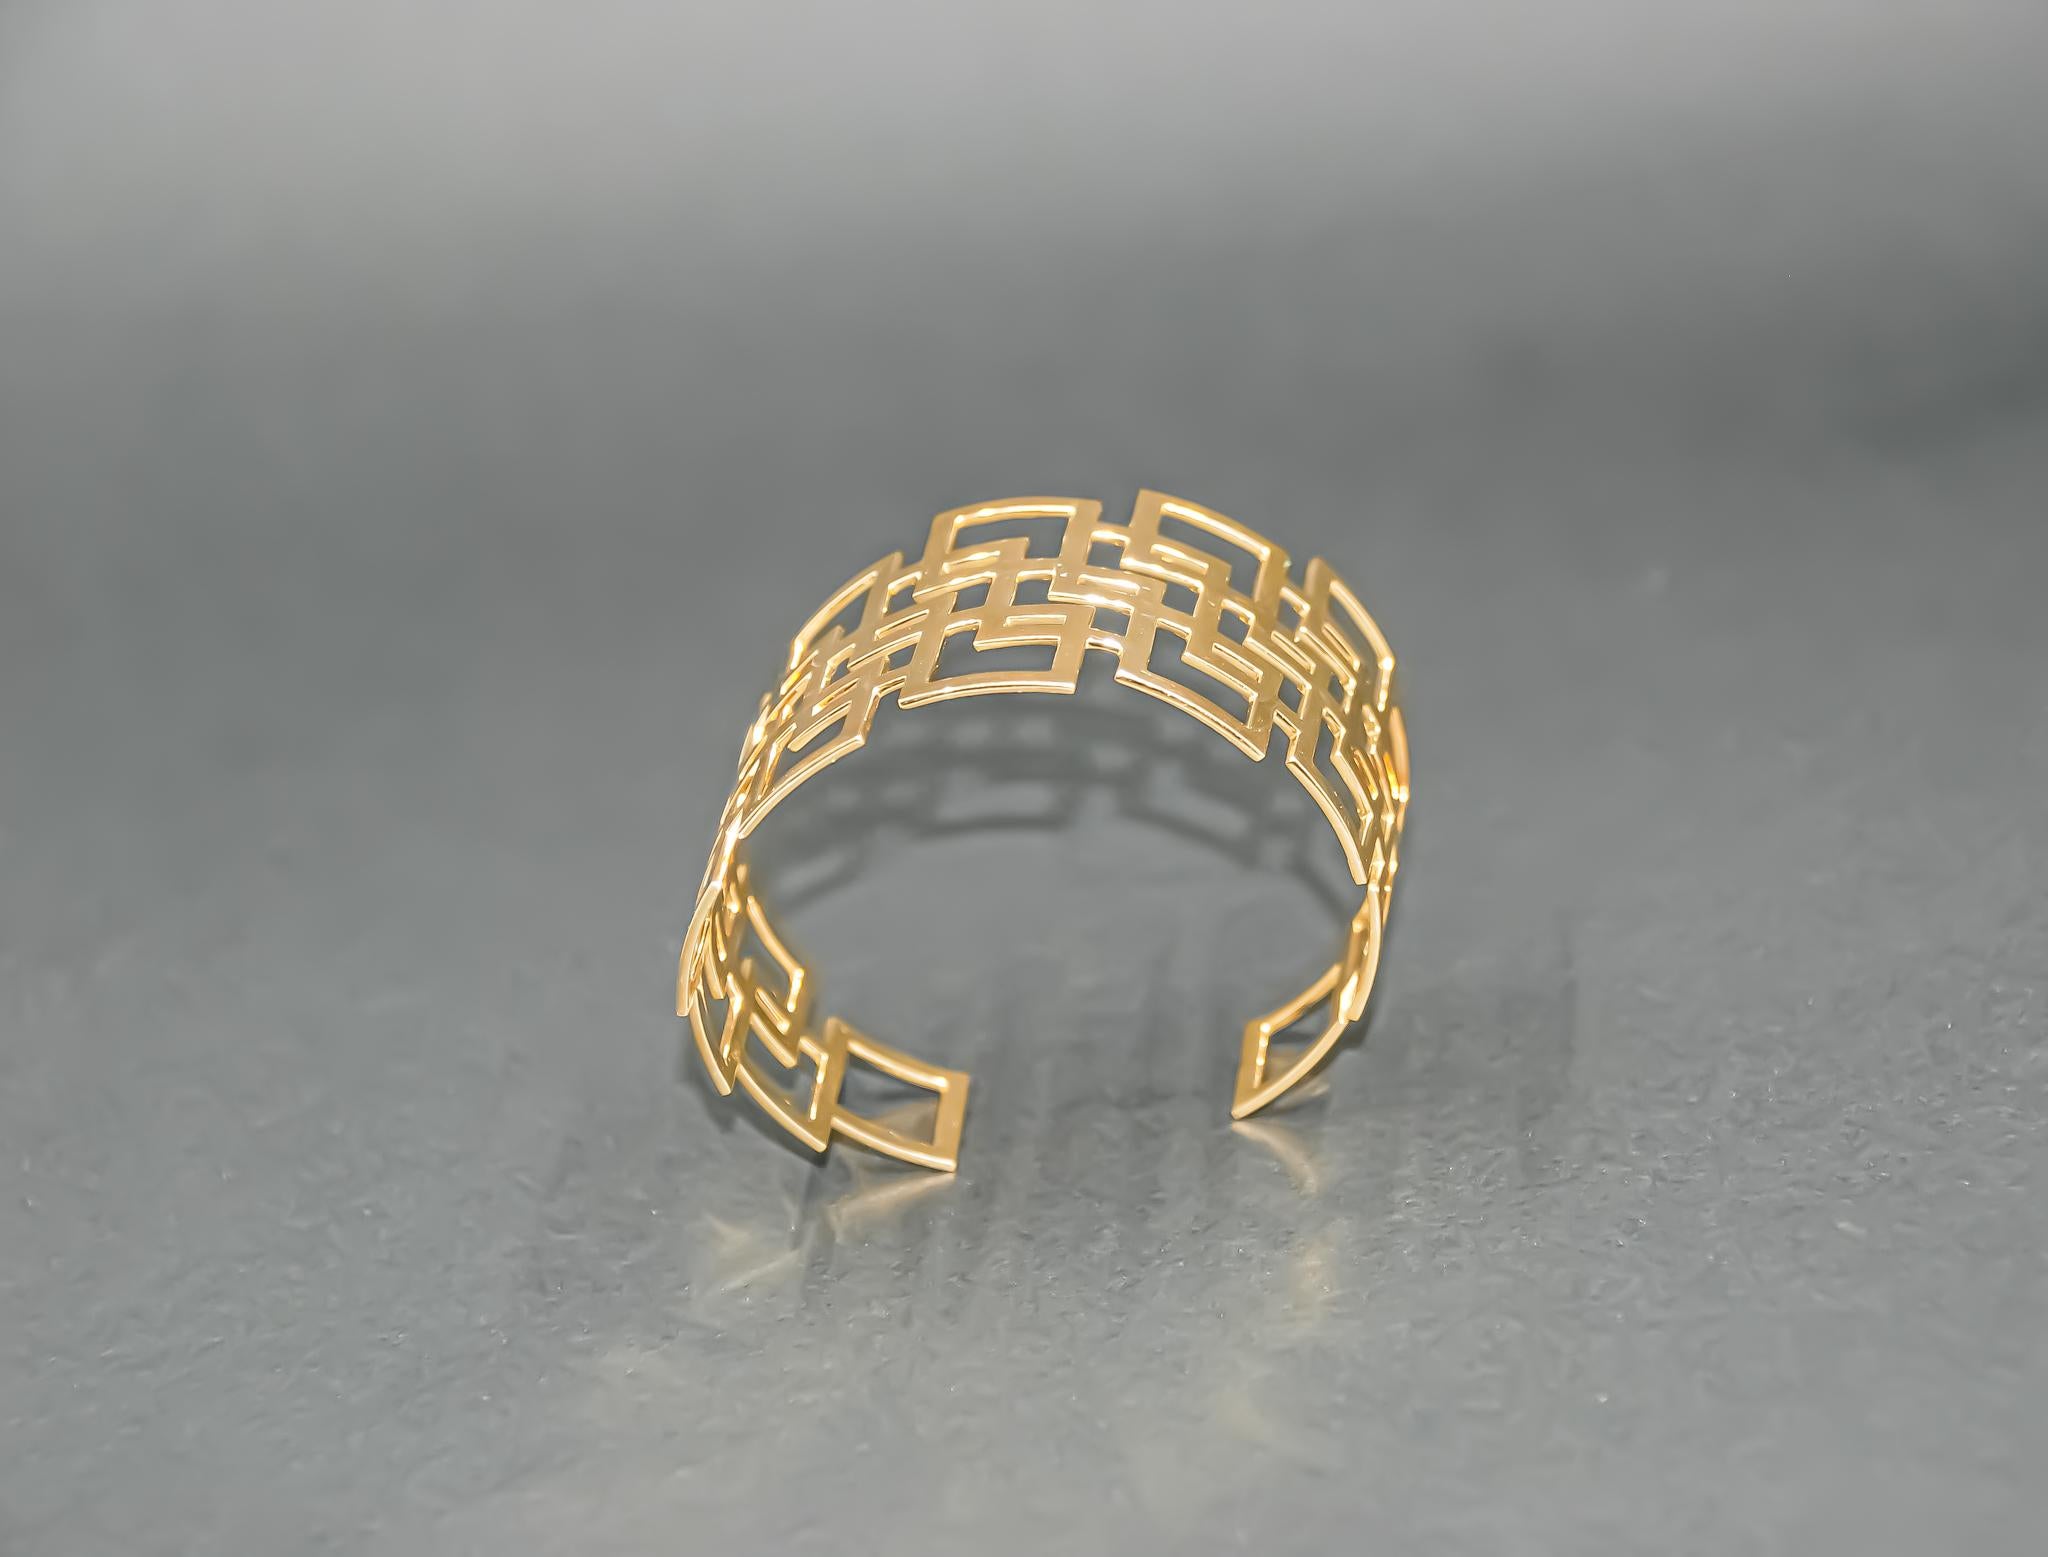 Geometric Cuff Bracelet in 18kt Gold by Mohamad Kamra In New Condition For Sale In Dubai, AE